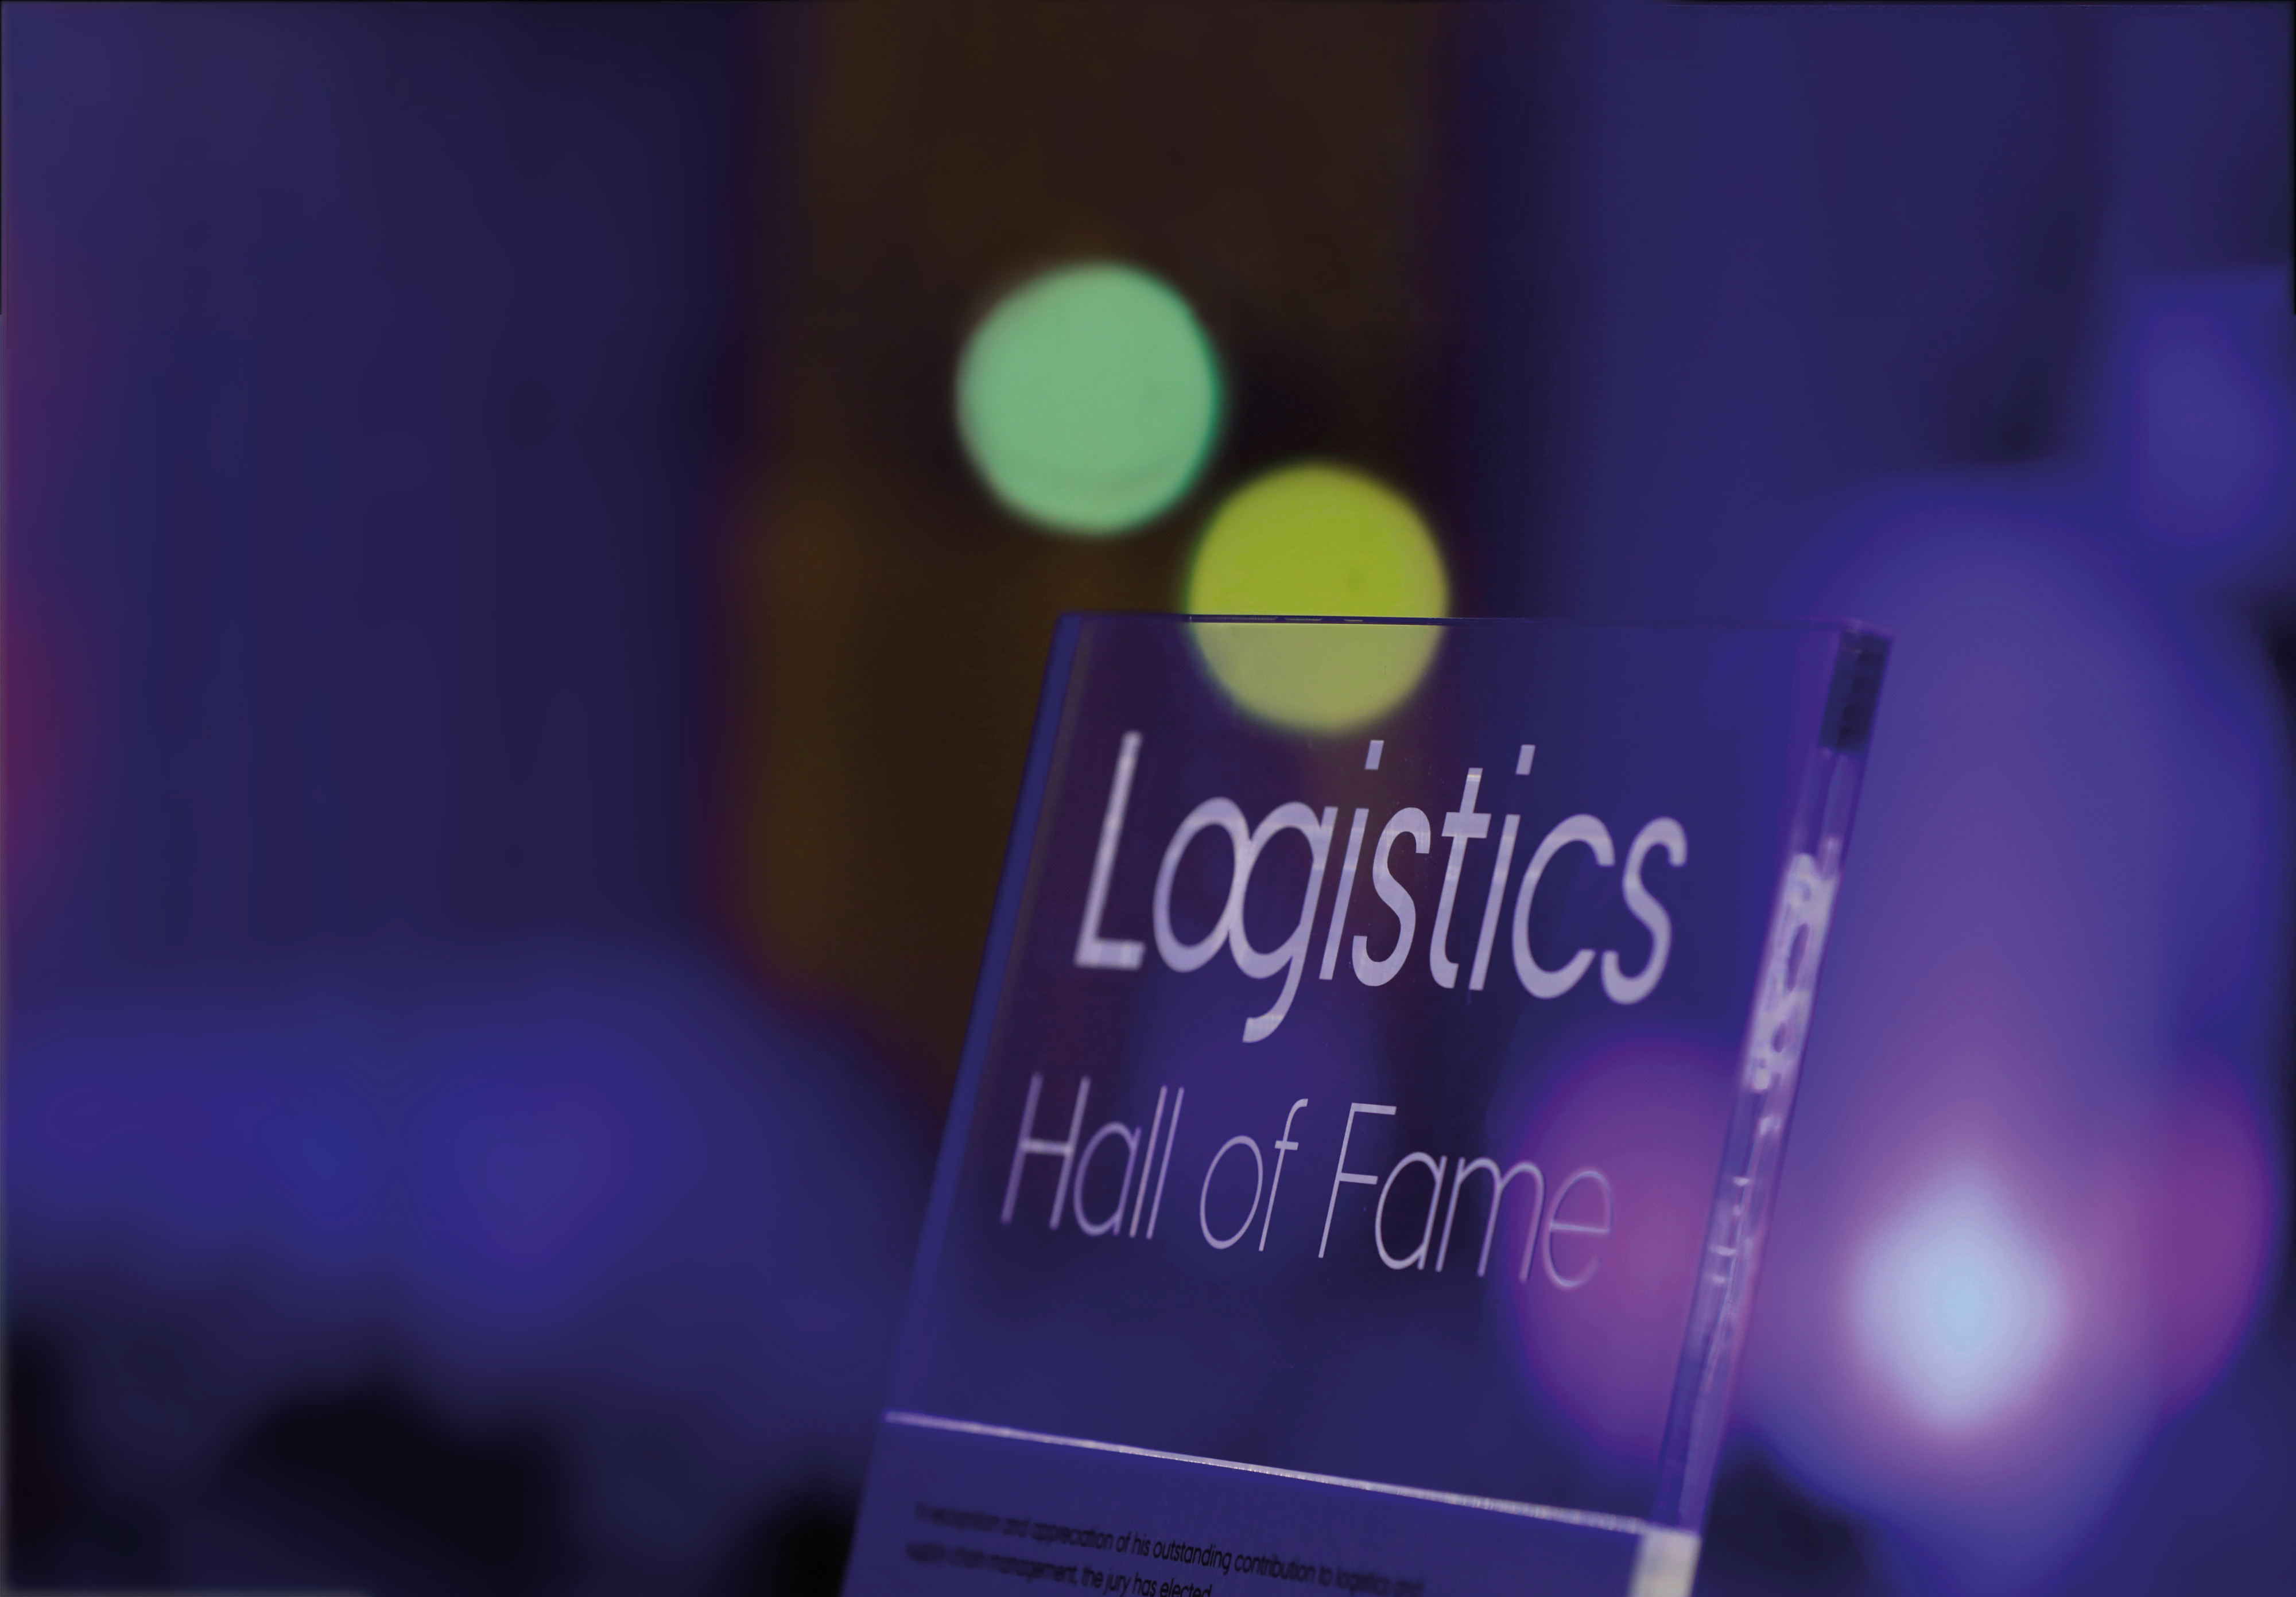 Logistics Hall of Fame: Deadline for proposals ends on May 13